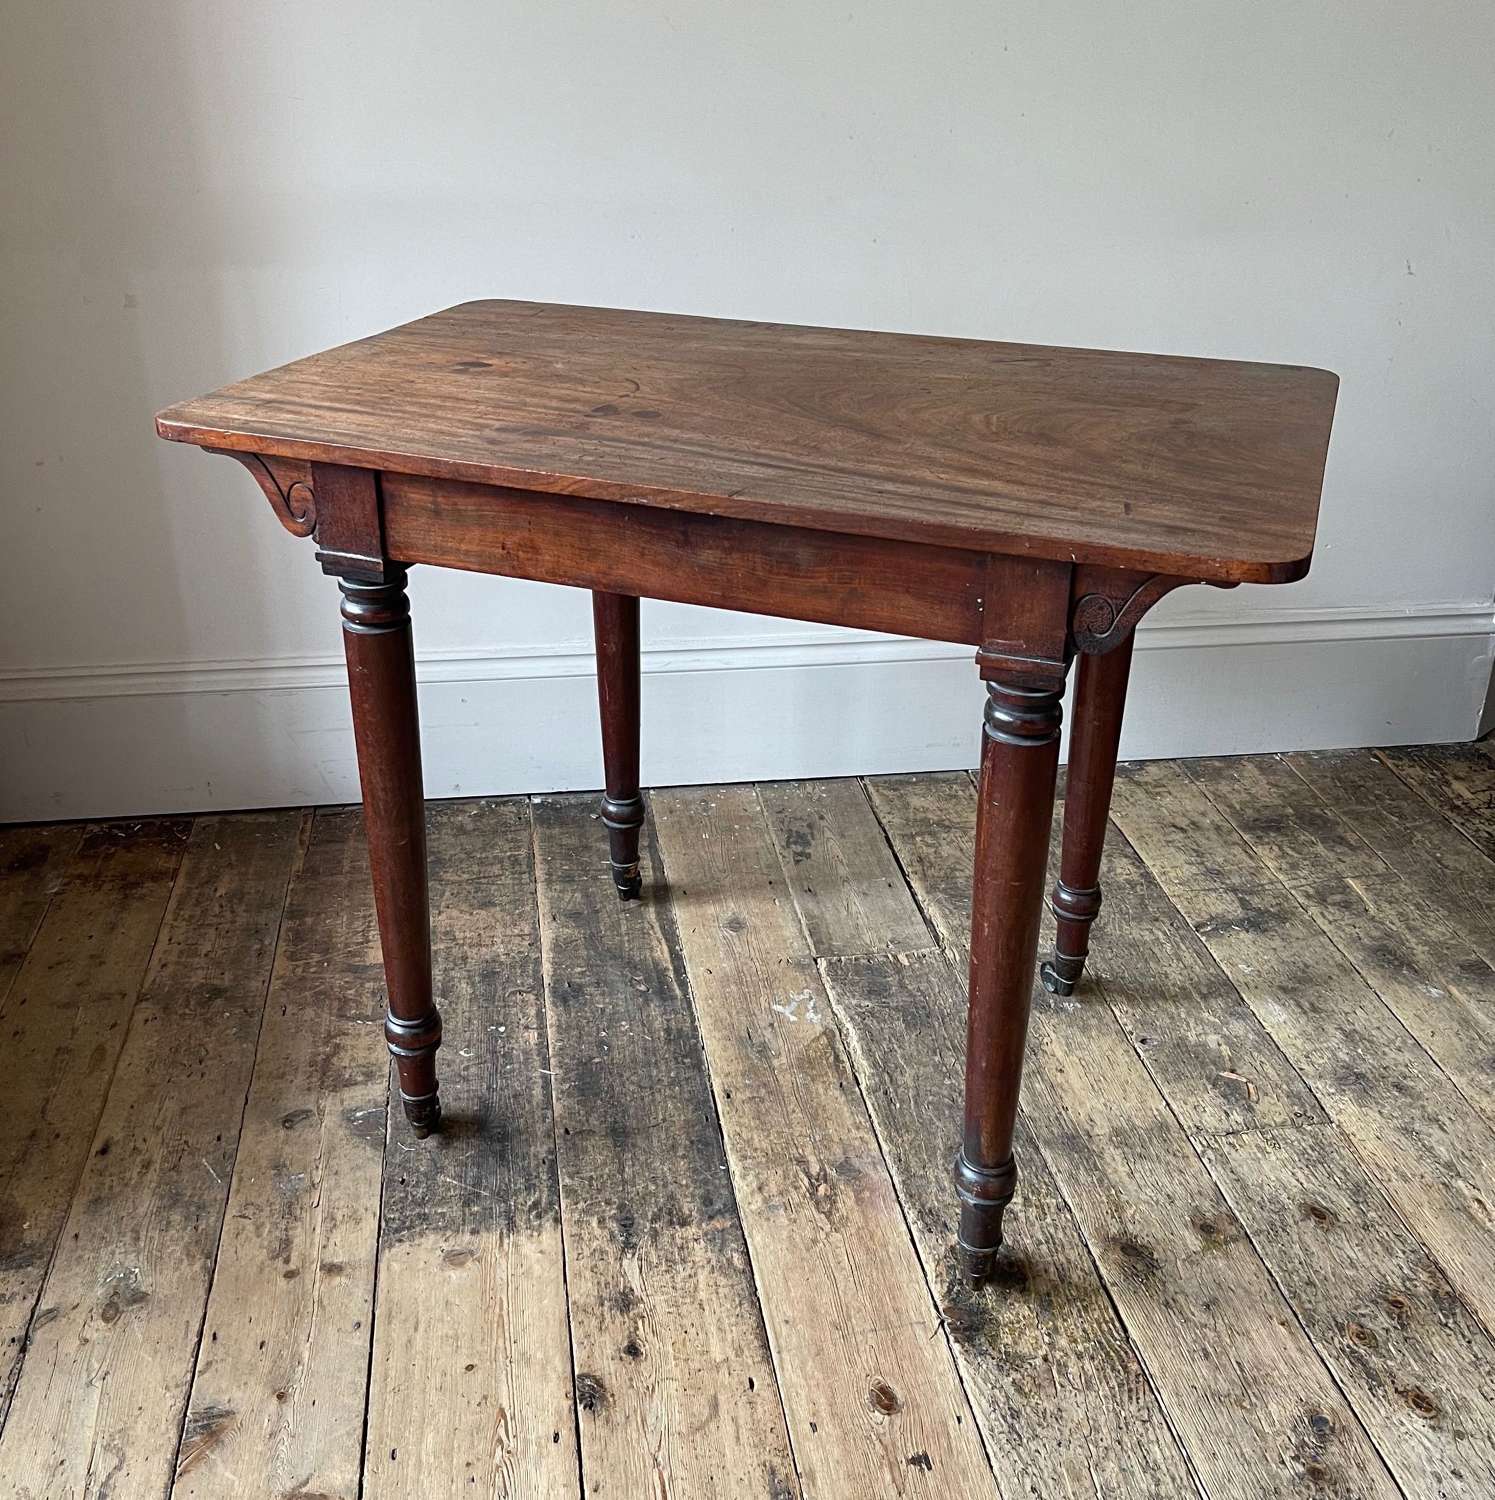 Holland and Sons table